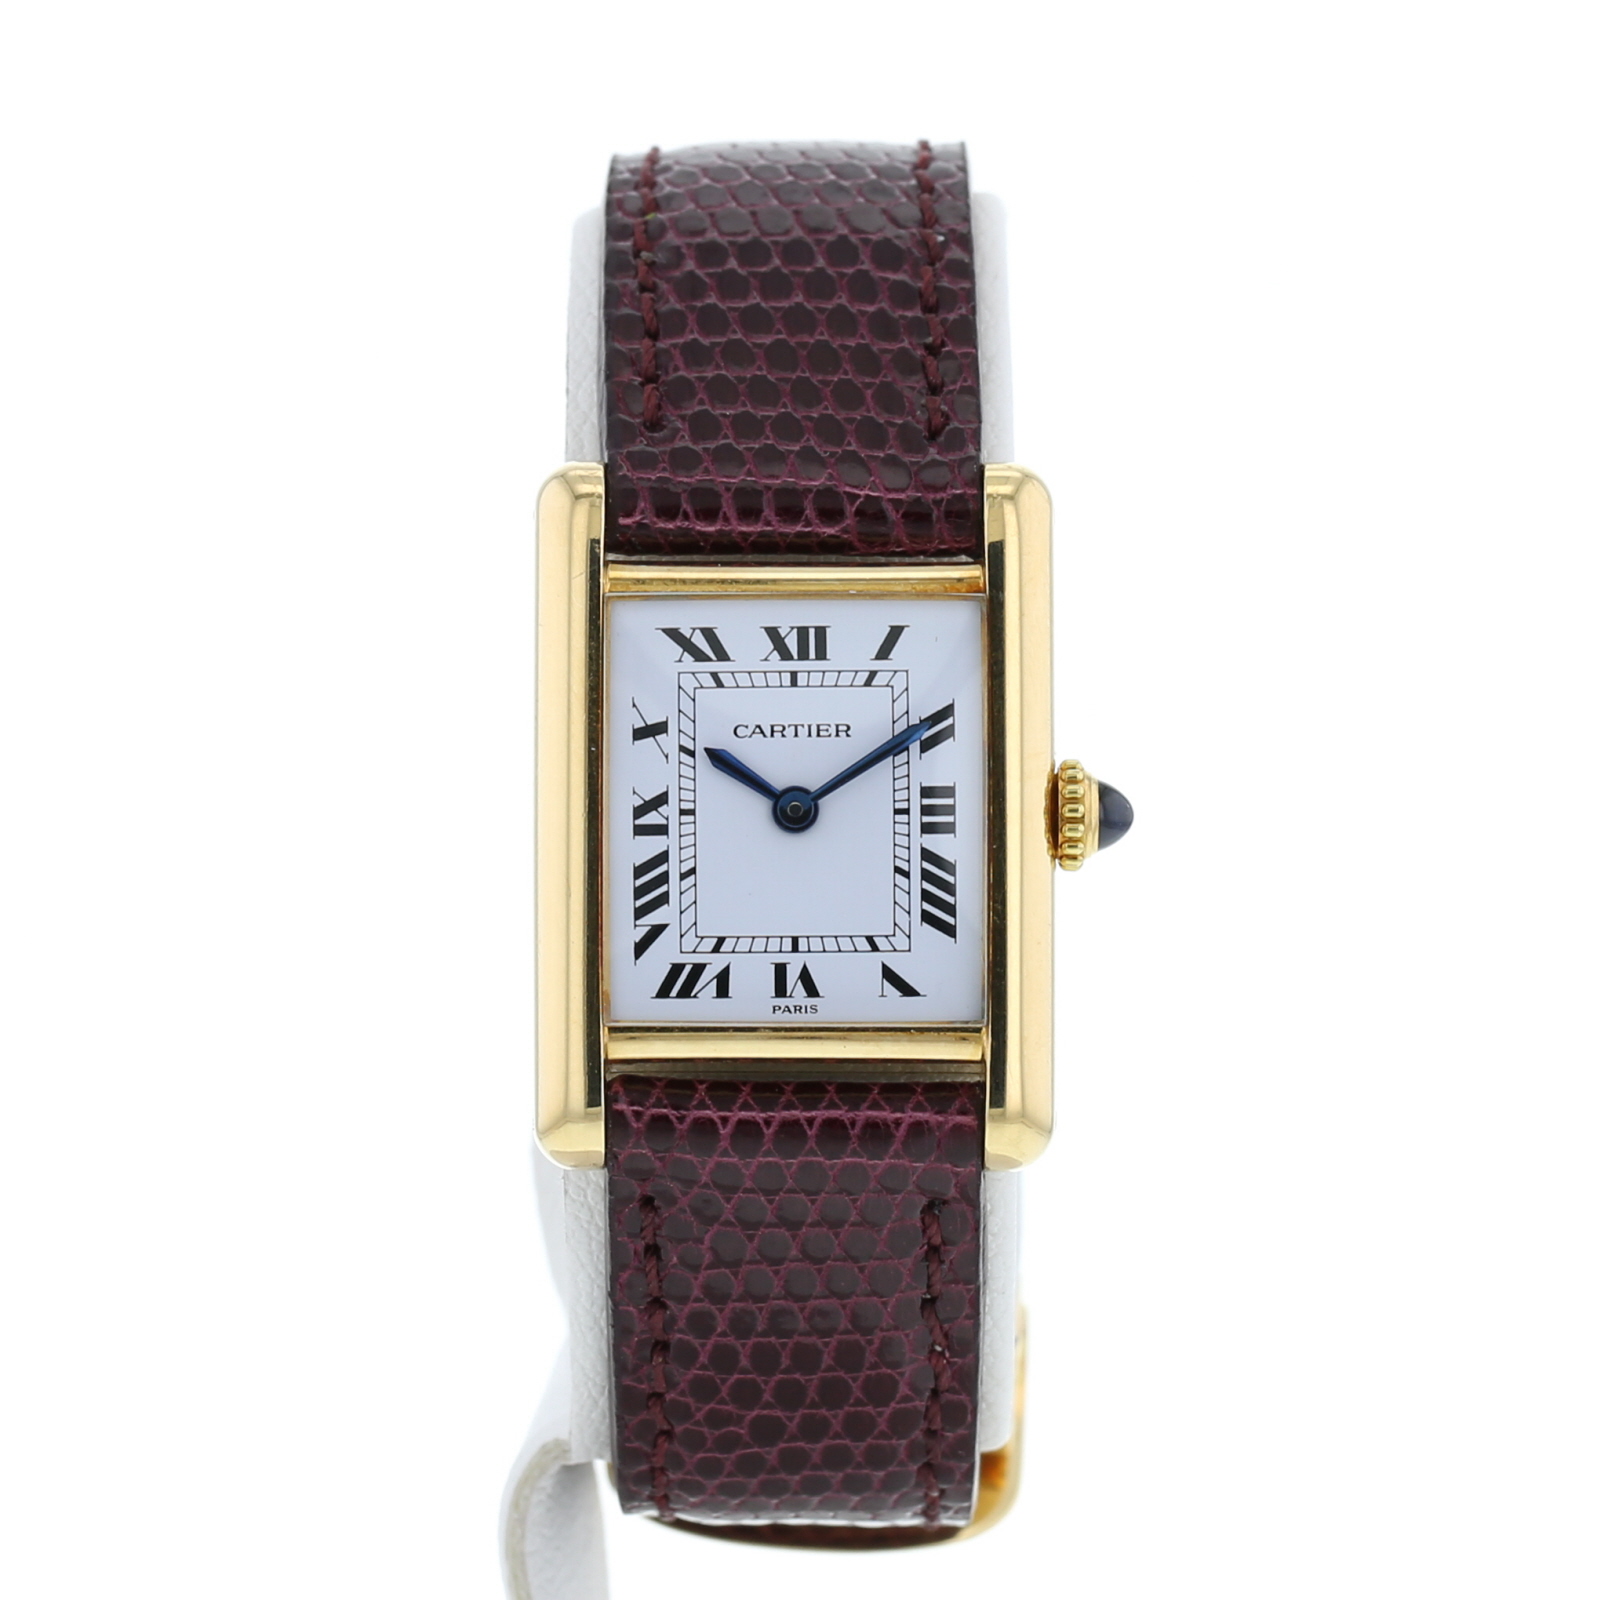 Cartier Tank Watch 394767 | Collector Square